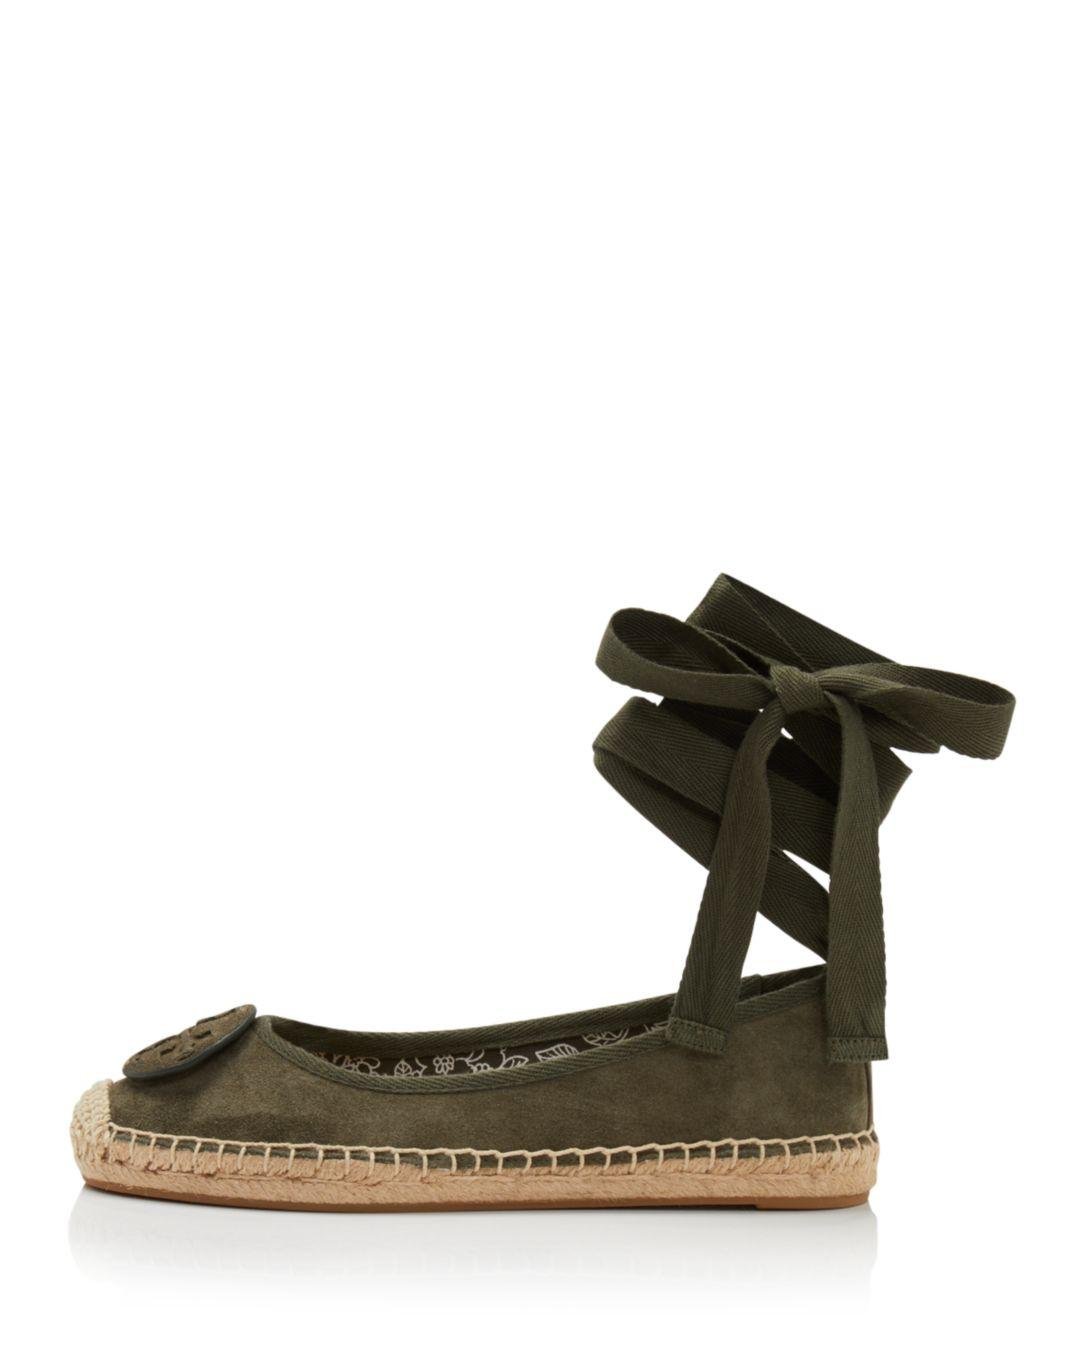 Tory Burch Canvas Minnie Espadrilles in Green Save 18% Womens Shoes Flats and flat shoes Espadrille shoes and sandals 